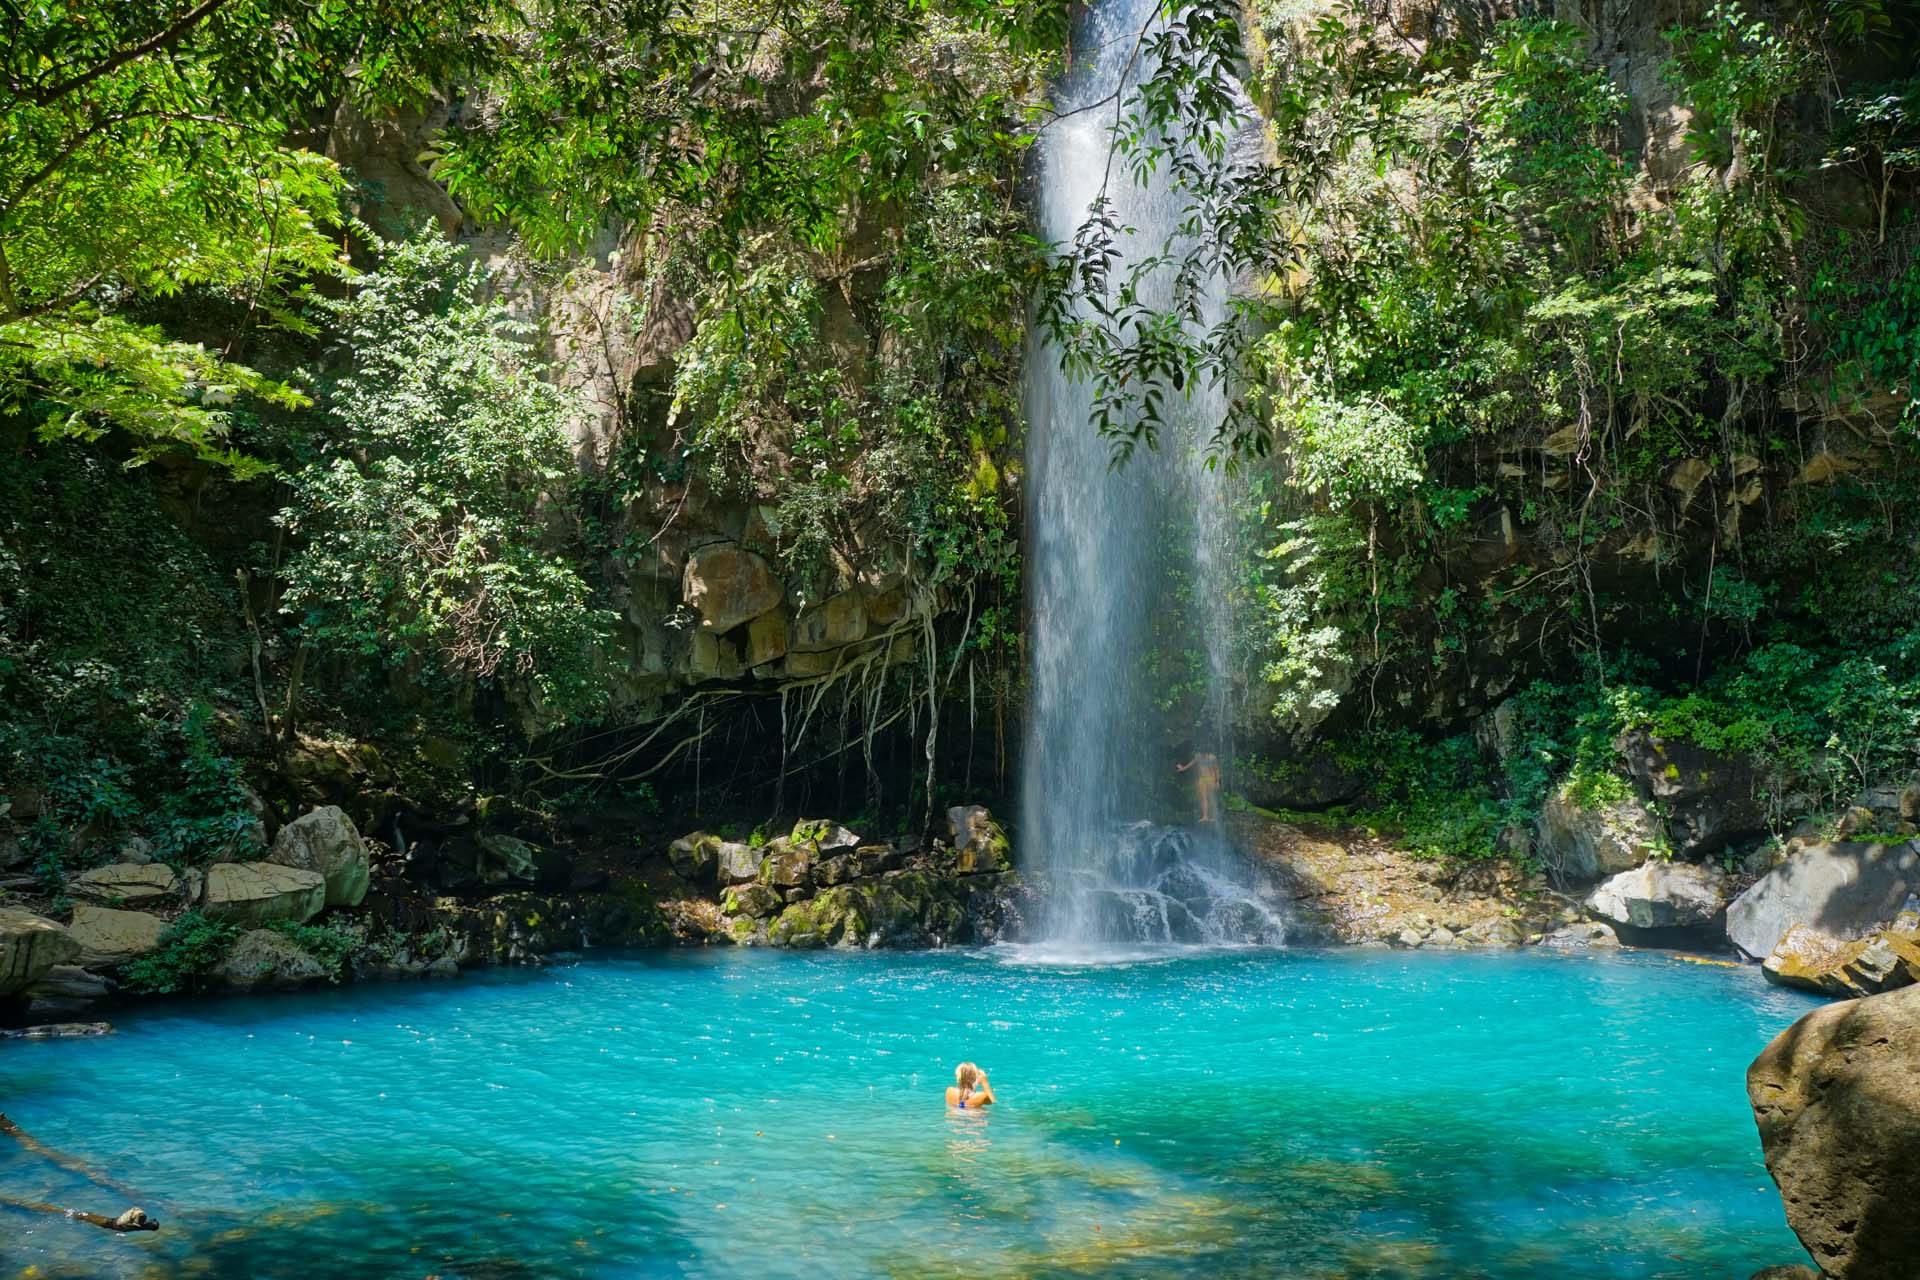 An idyllic waterfall in Costa Rica, with bright blue water and a swimmer. Surrounded by rocks and trees